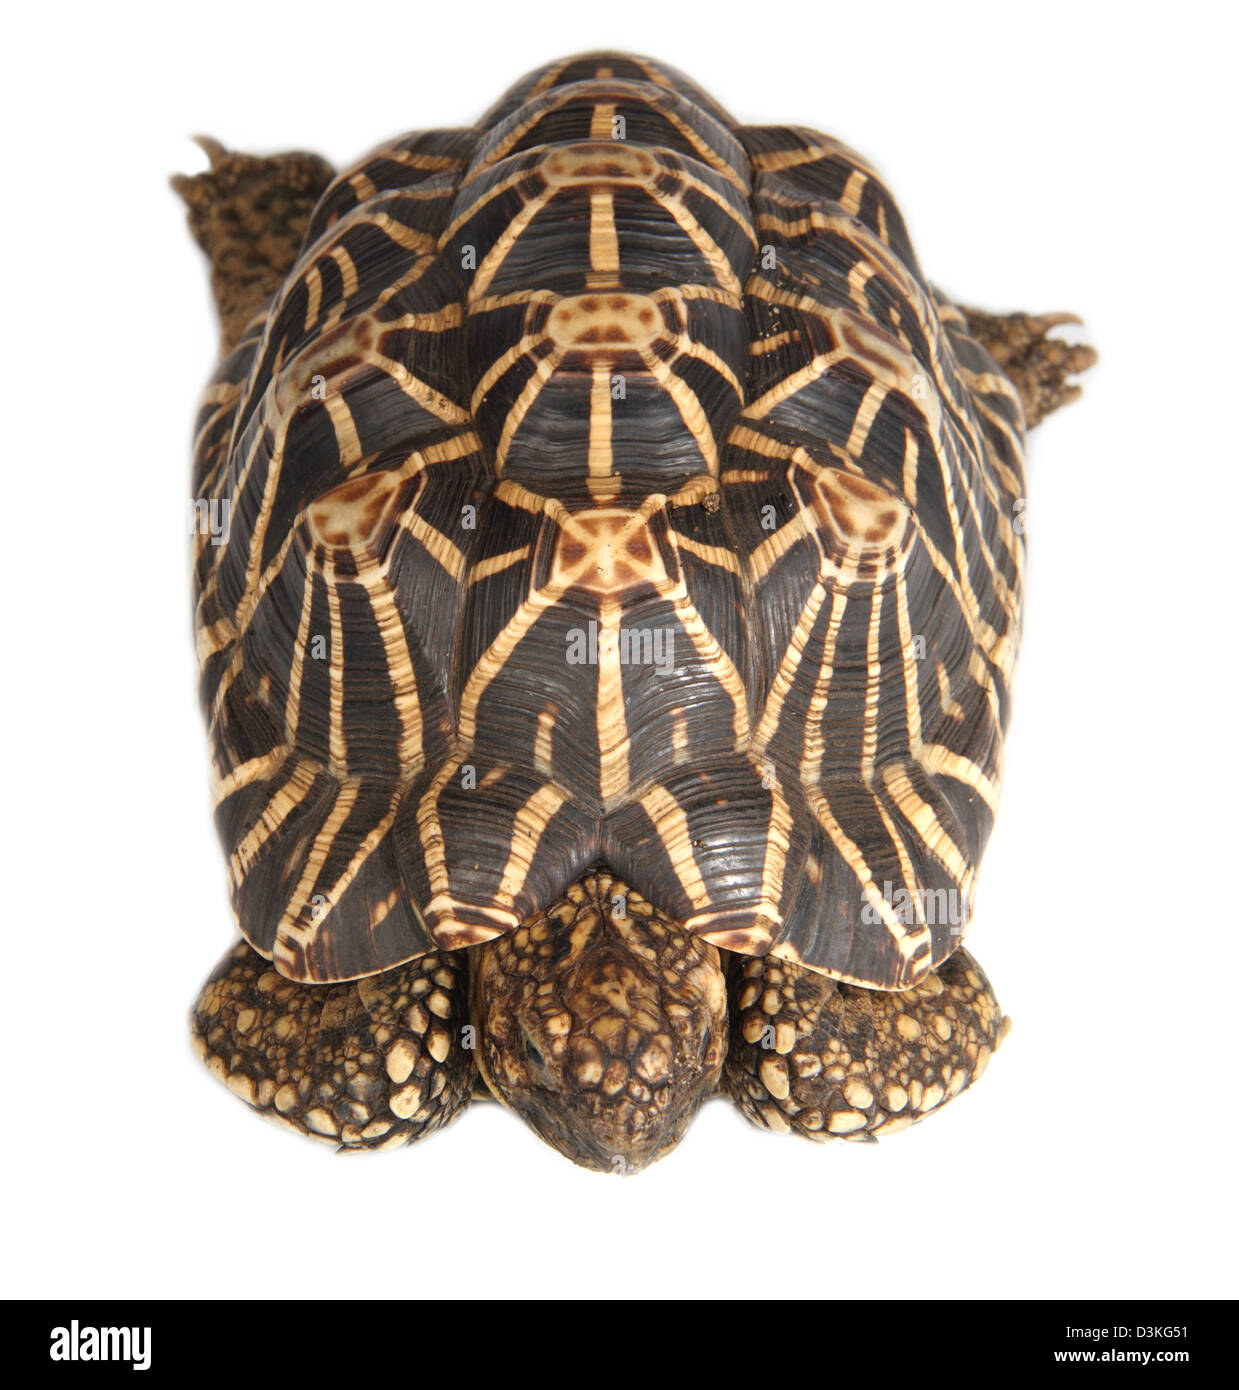 Indian star tortoise Geochelone elegans photographed in a studio suitable for cut-out Stock Photo